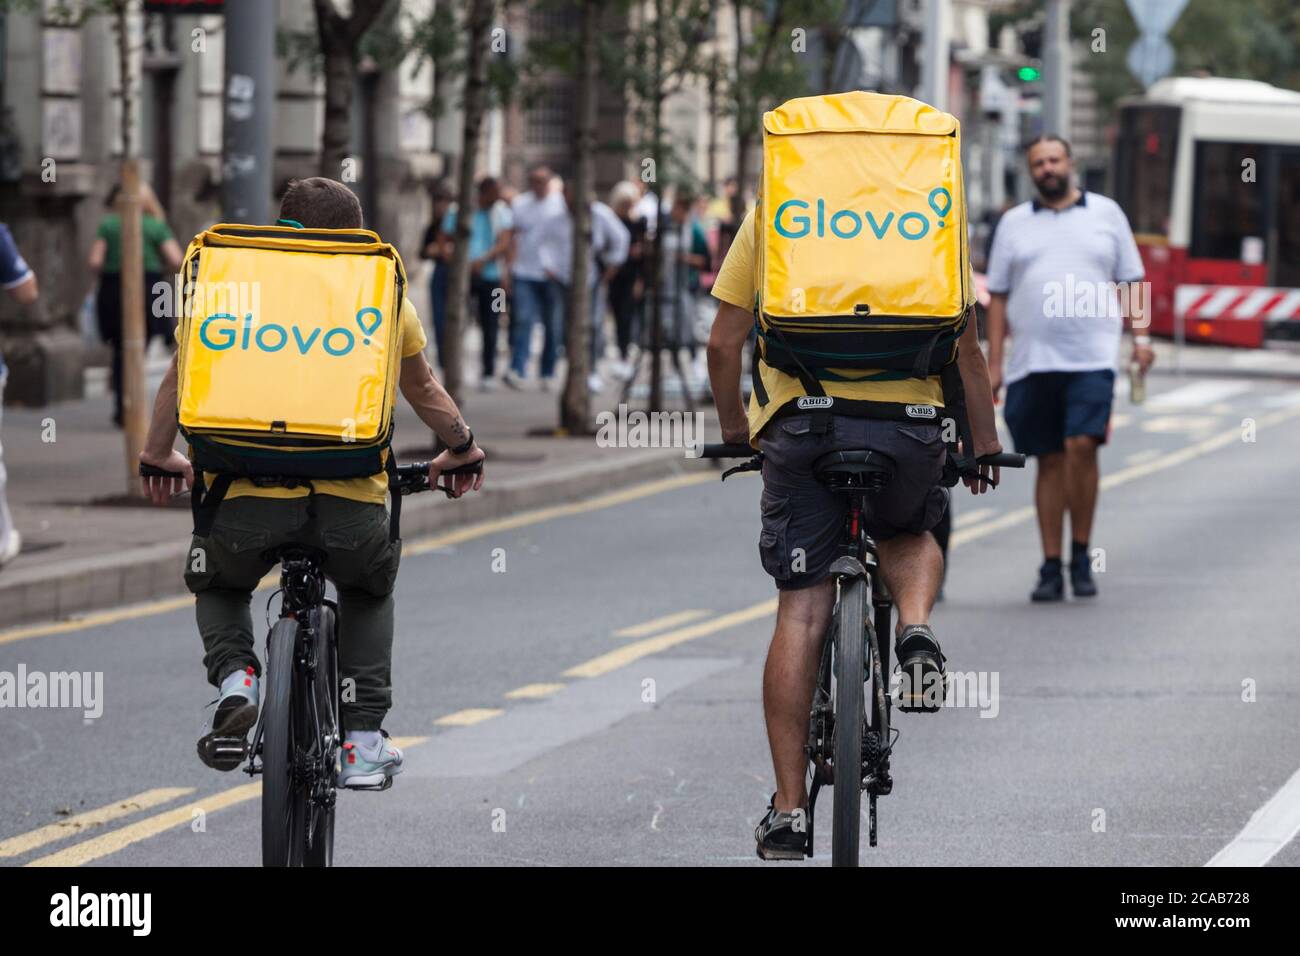 BELGRADE, SERBIA - SEPTEMBER 28, 2019: Glovo logo on the bag of two delivery men on their bicycles in belgrade. Glovo is a Spanish Food delivery app s Stock Photo